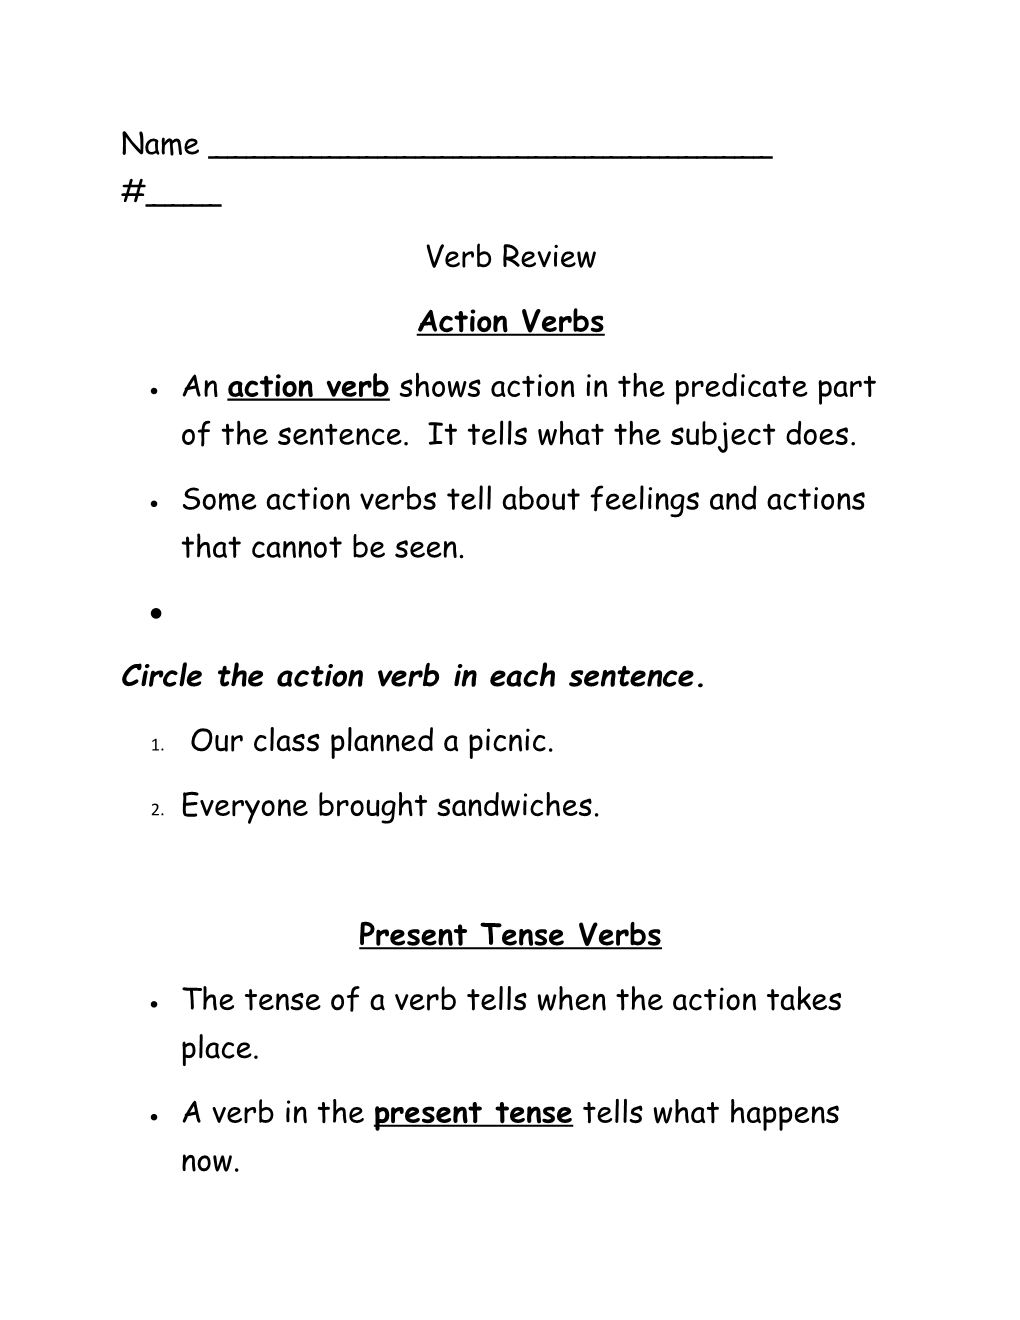 Circle the Action Verb in Each Sentence